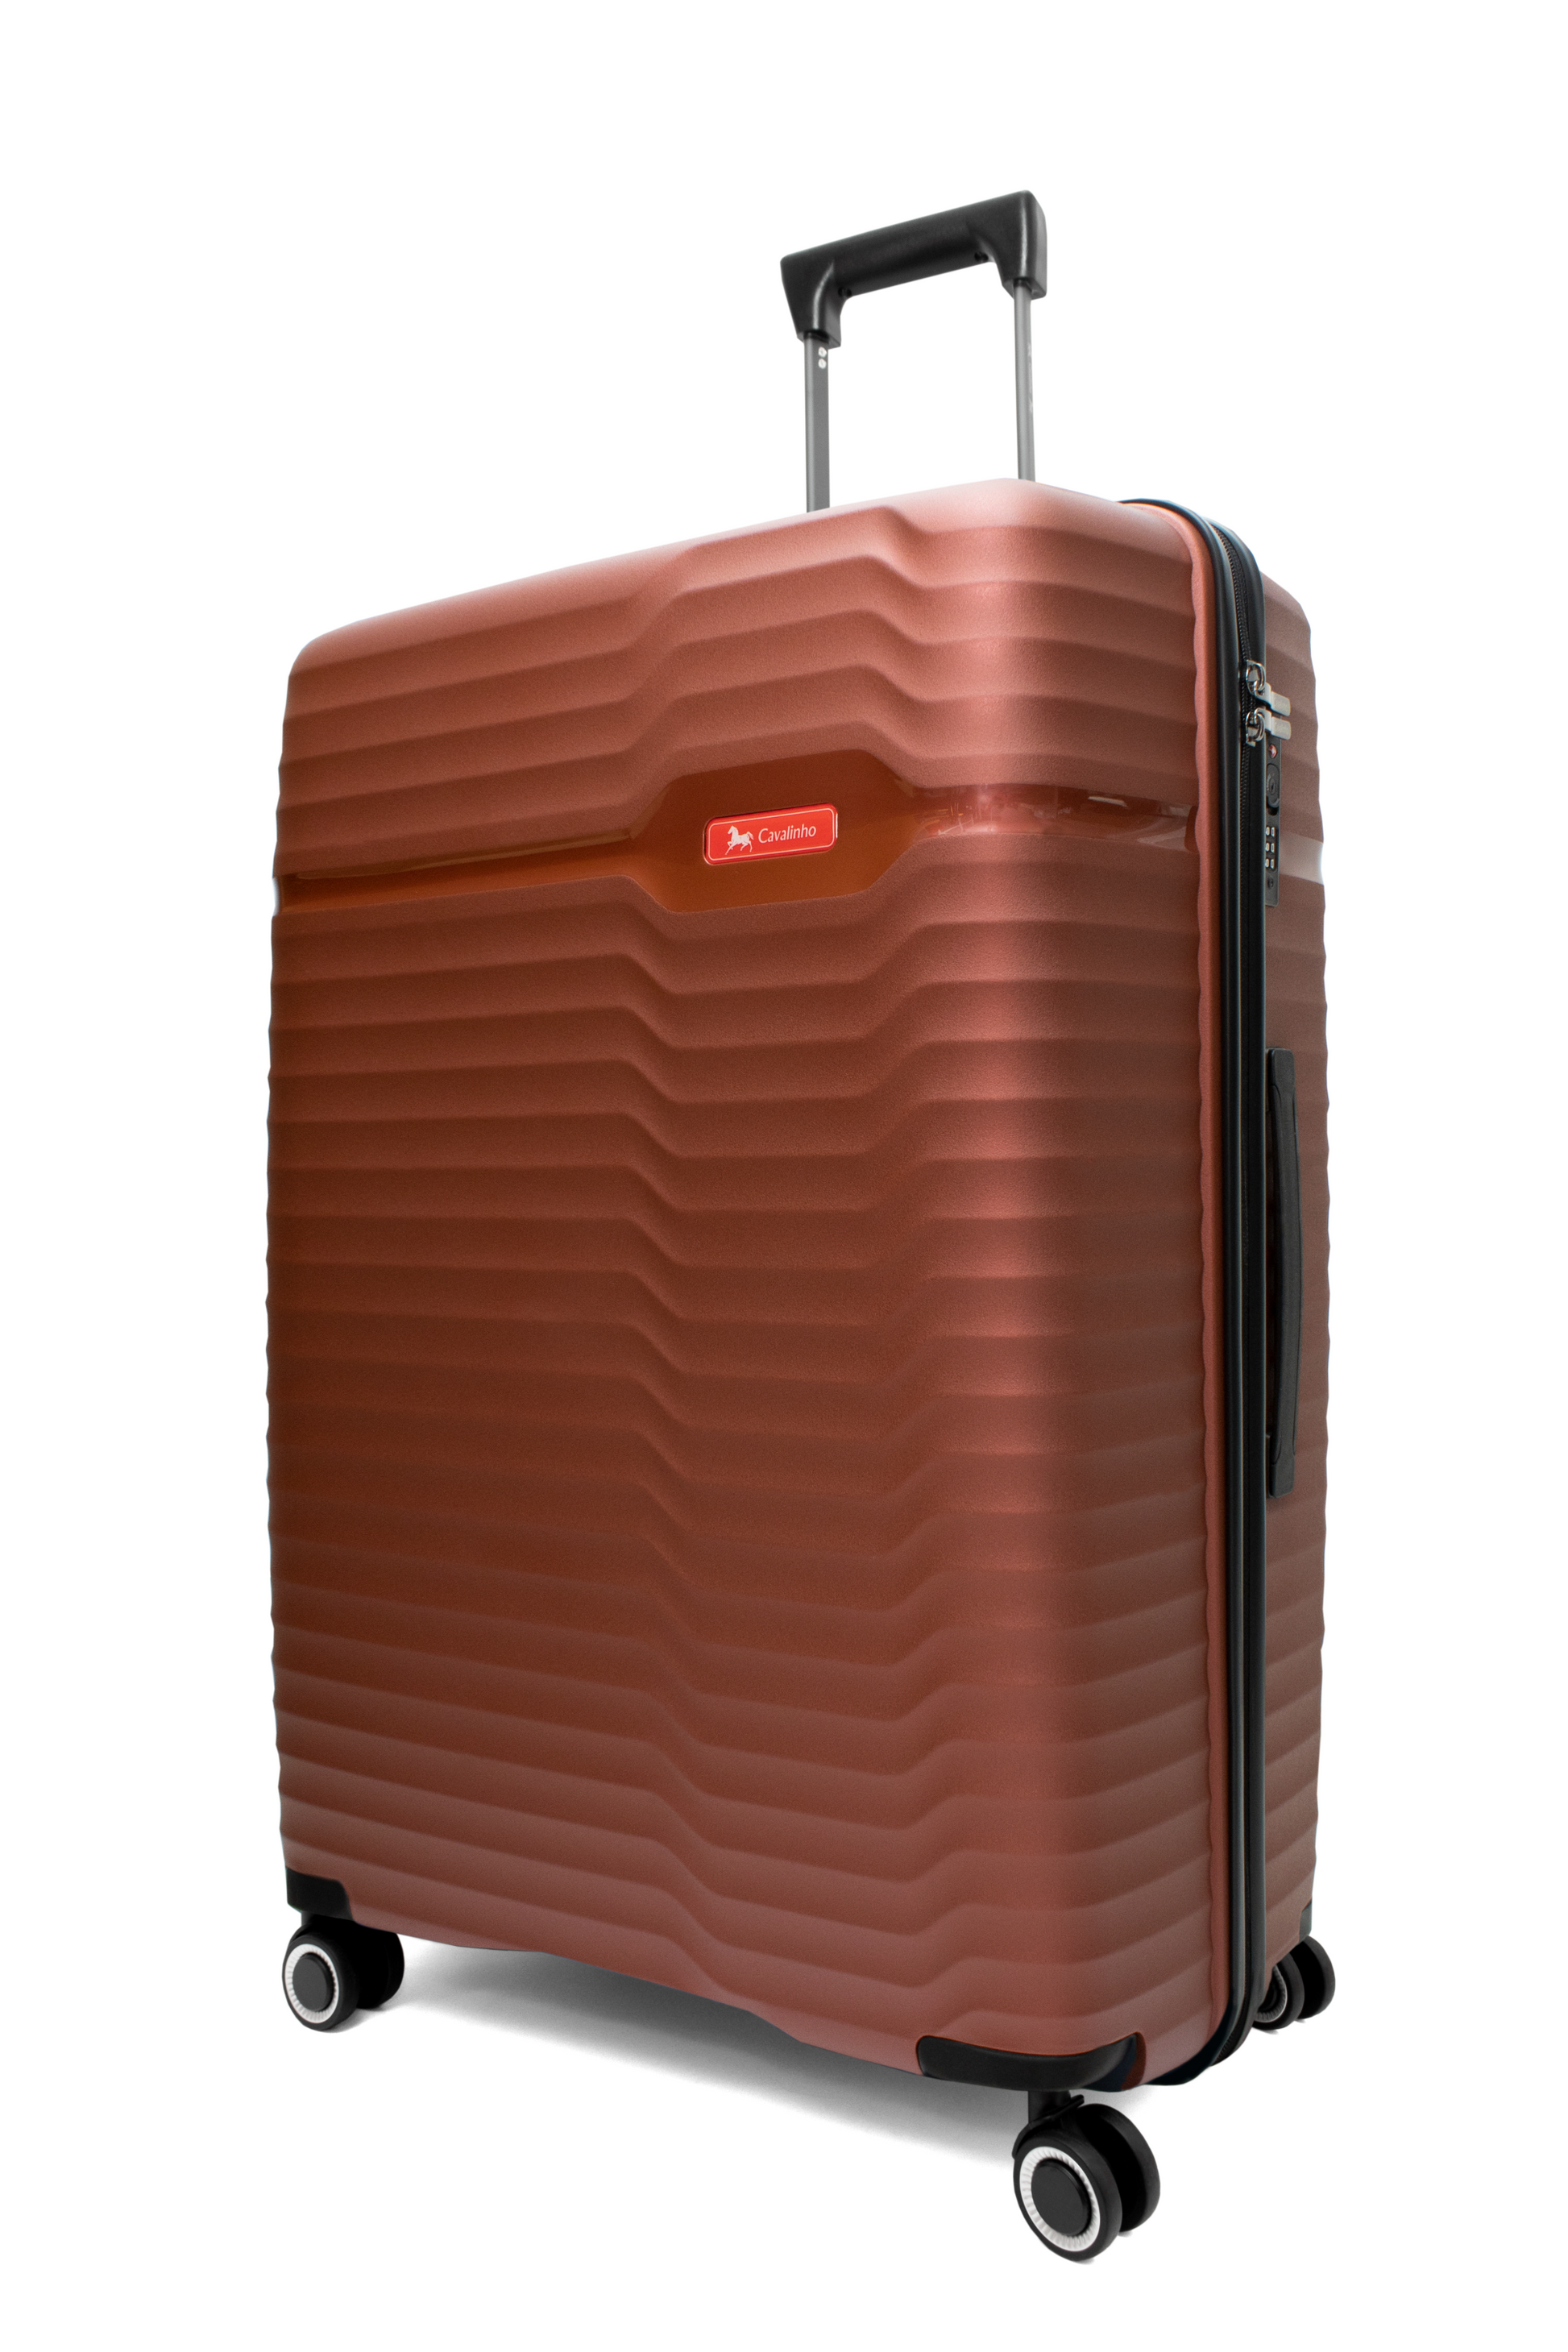 Cavalinho Check-in Hardside Luggage (24" or 28") - 28 inch IndianRed - 68010003.24.28_2